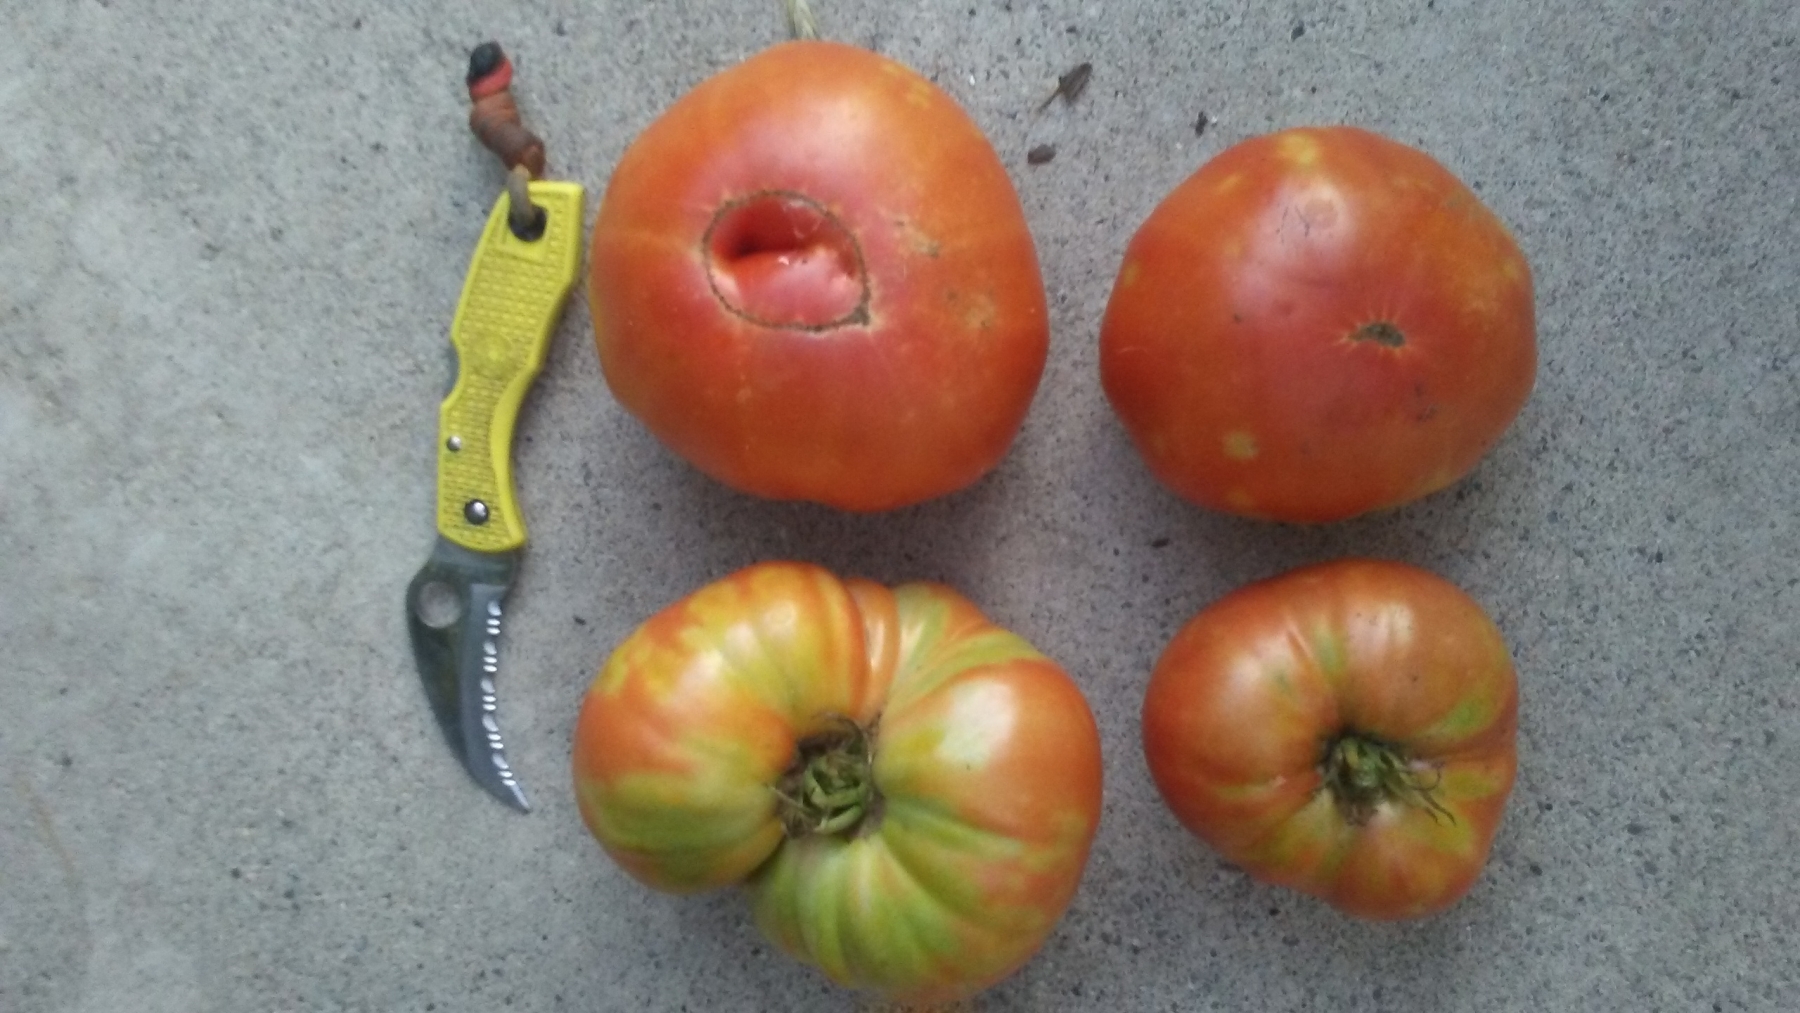 Huge Blue Gold™ Tomatoes!